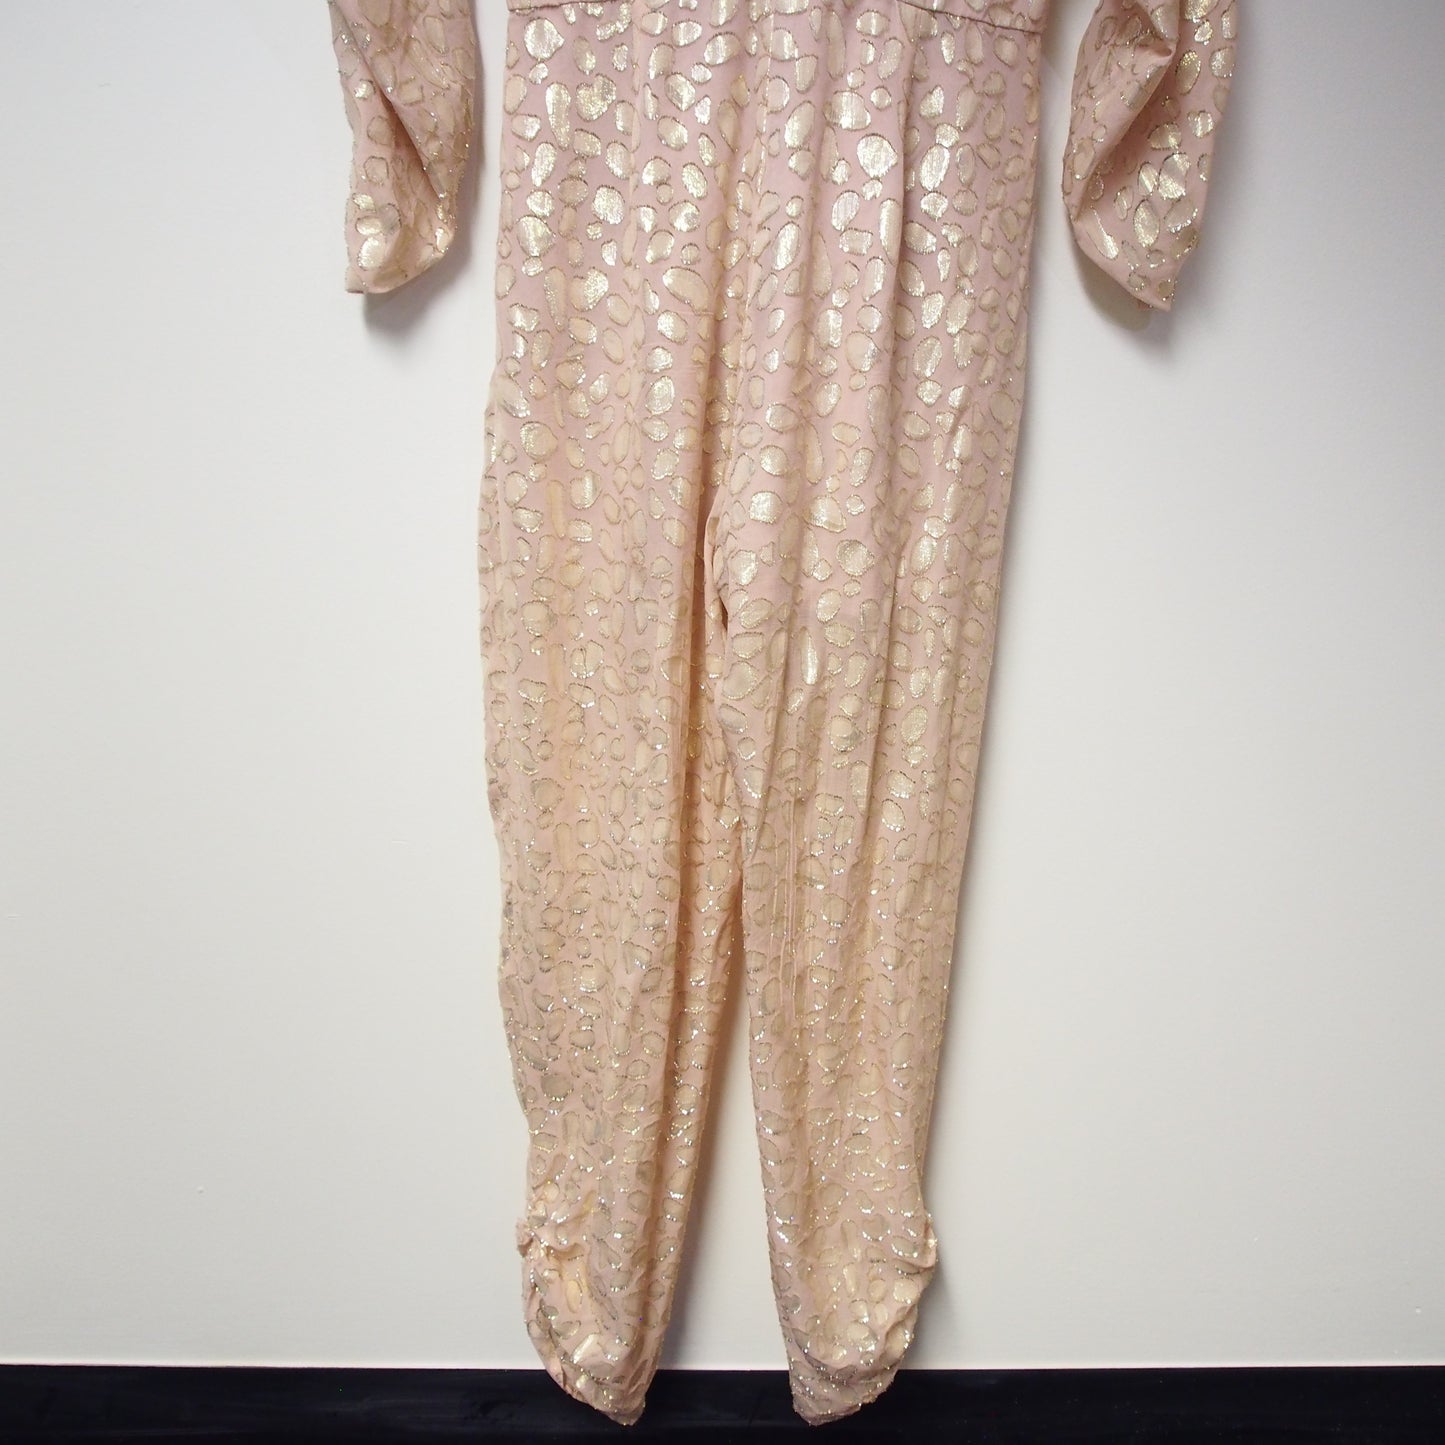 STELLA MCCARTNEY PINK AND GOLD PATTERNED JUMPSUIT - SIZE 40